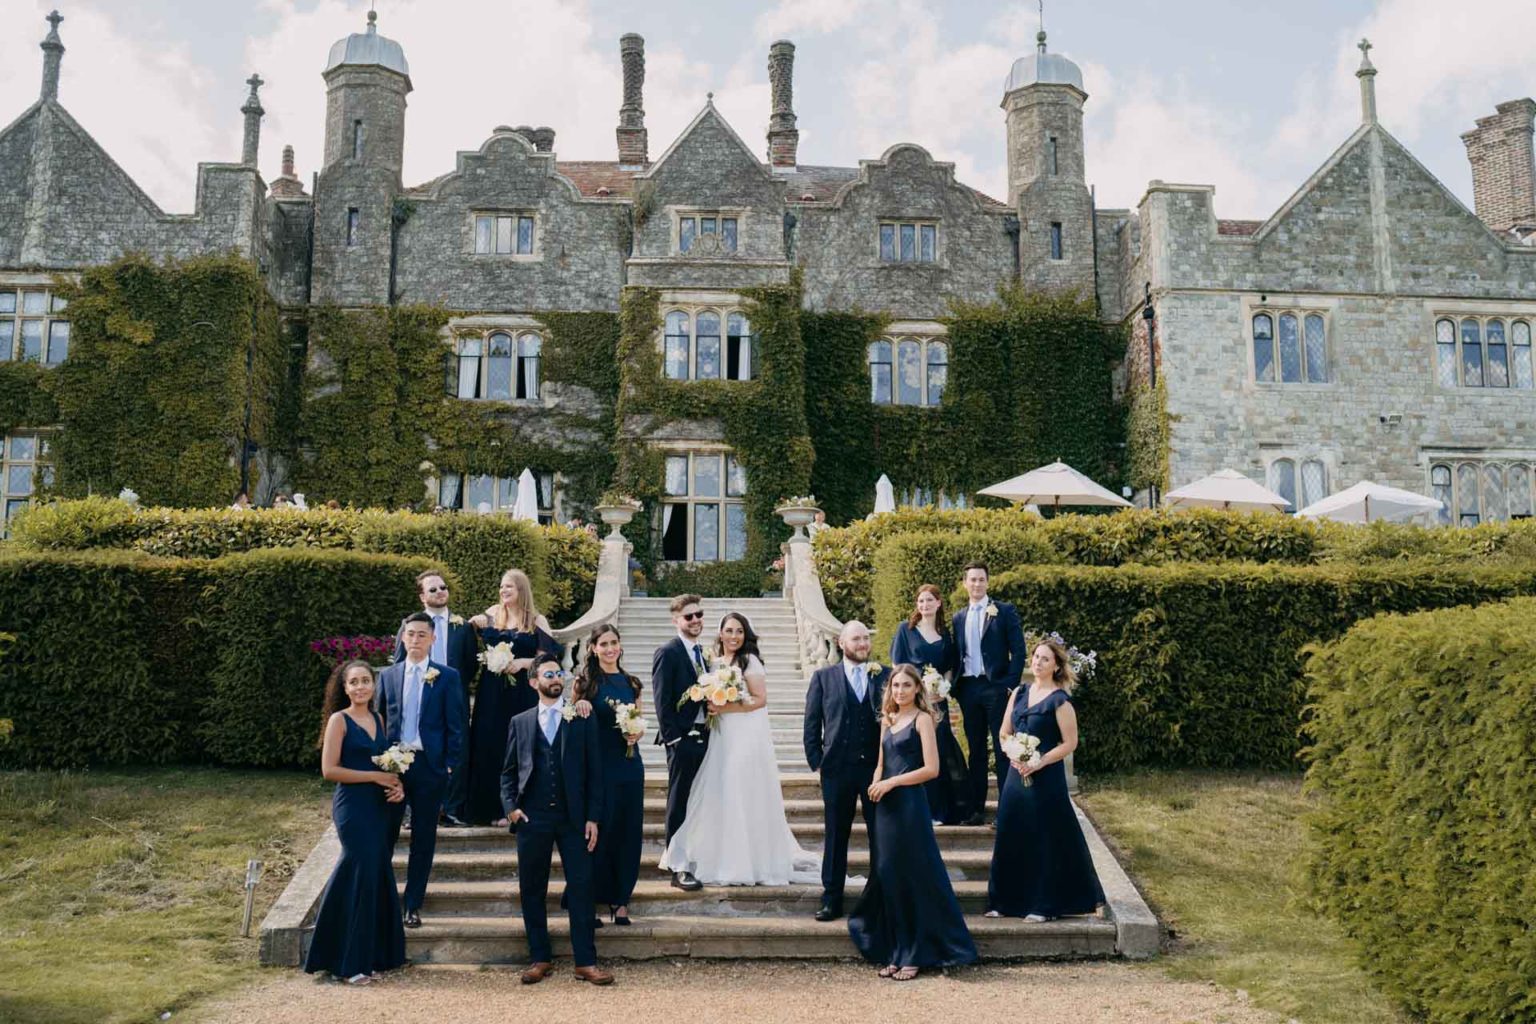 best wedding photography group photo idea with bridal party on the stairs of eastwellmanor arranged in annie leibovitz vogue style